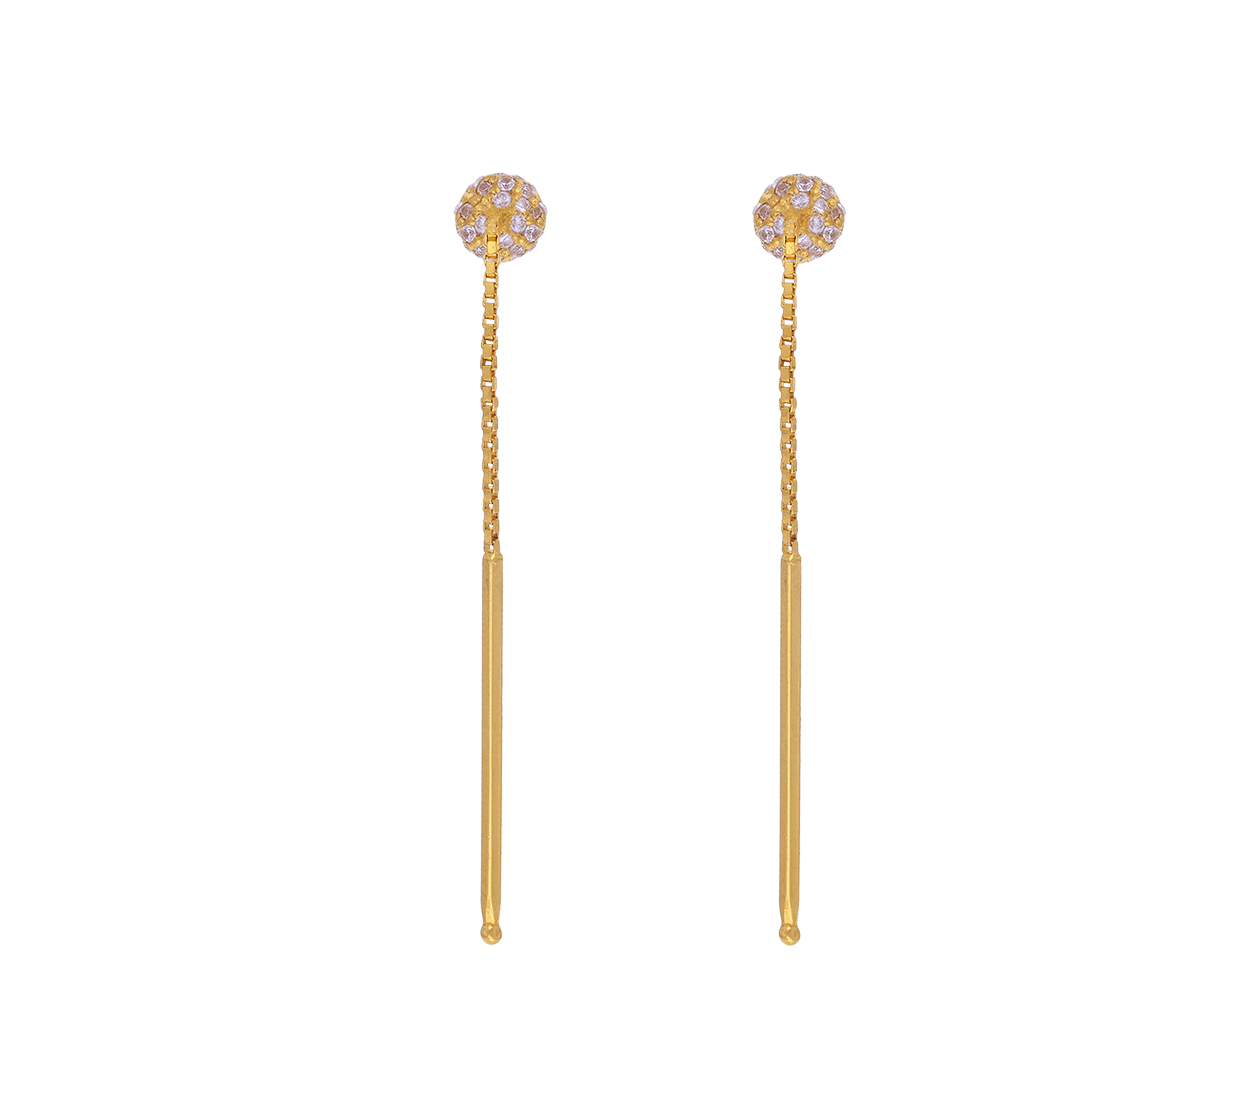 Discover 79+ simple sui dhaga gold earrings latest - esthdonghoadian